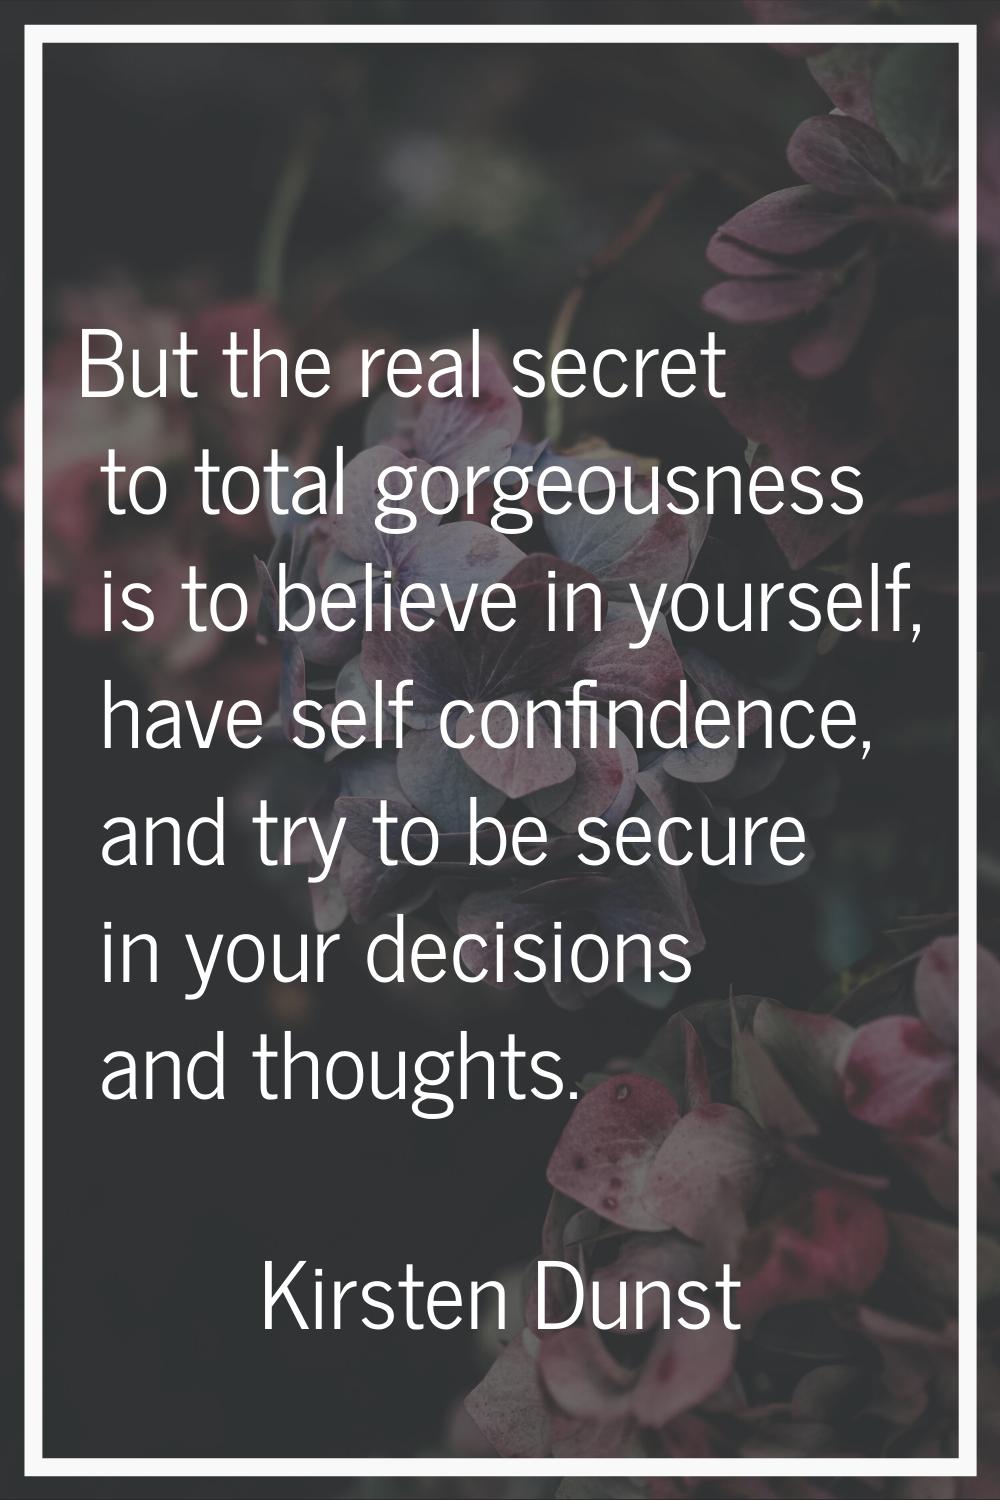 But the real secret to total gorgeousness is to believe in yourself, have self confindence, and try